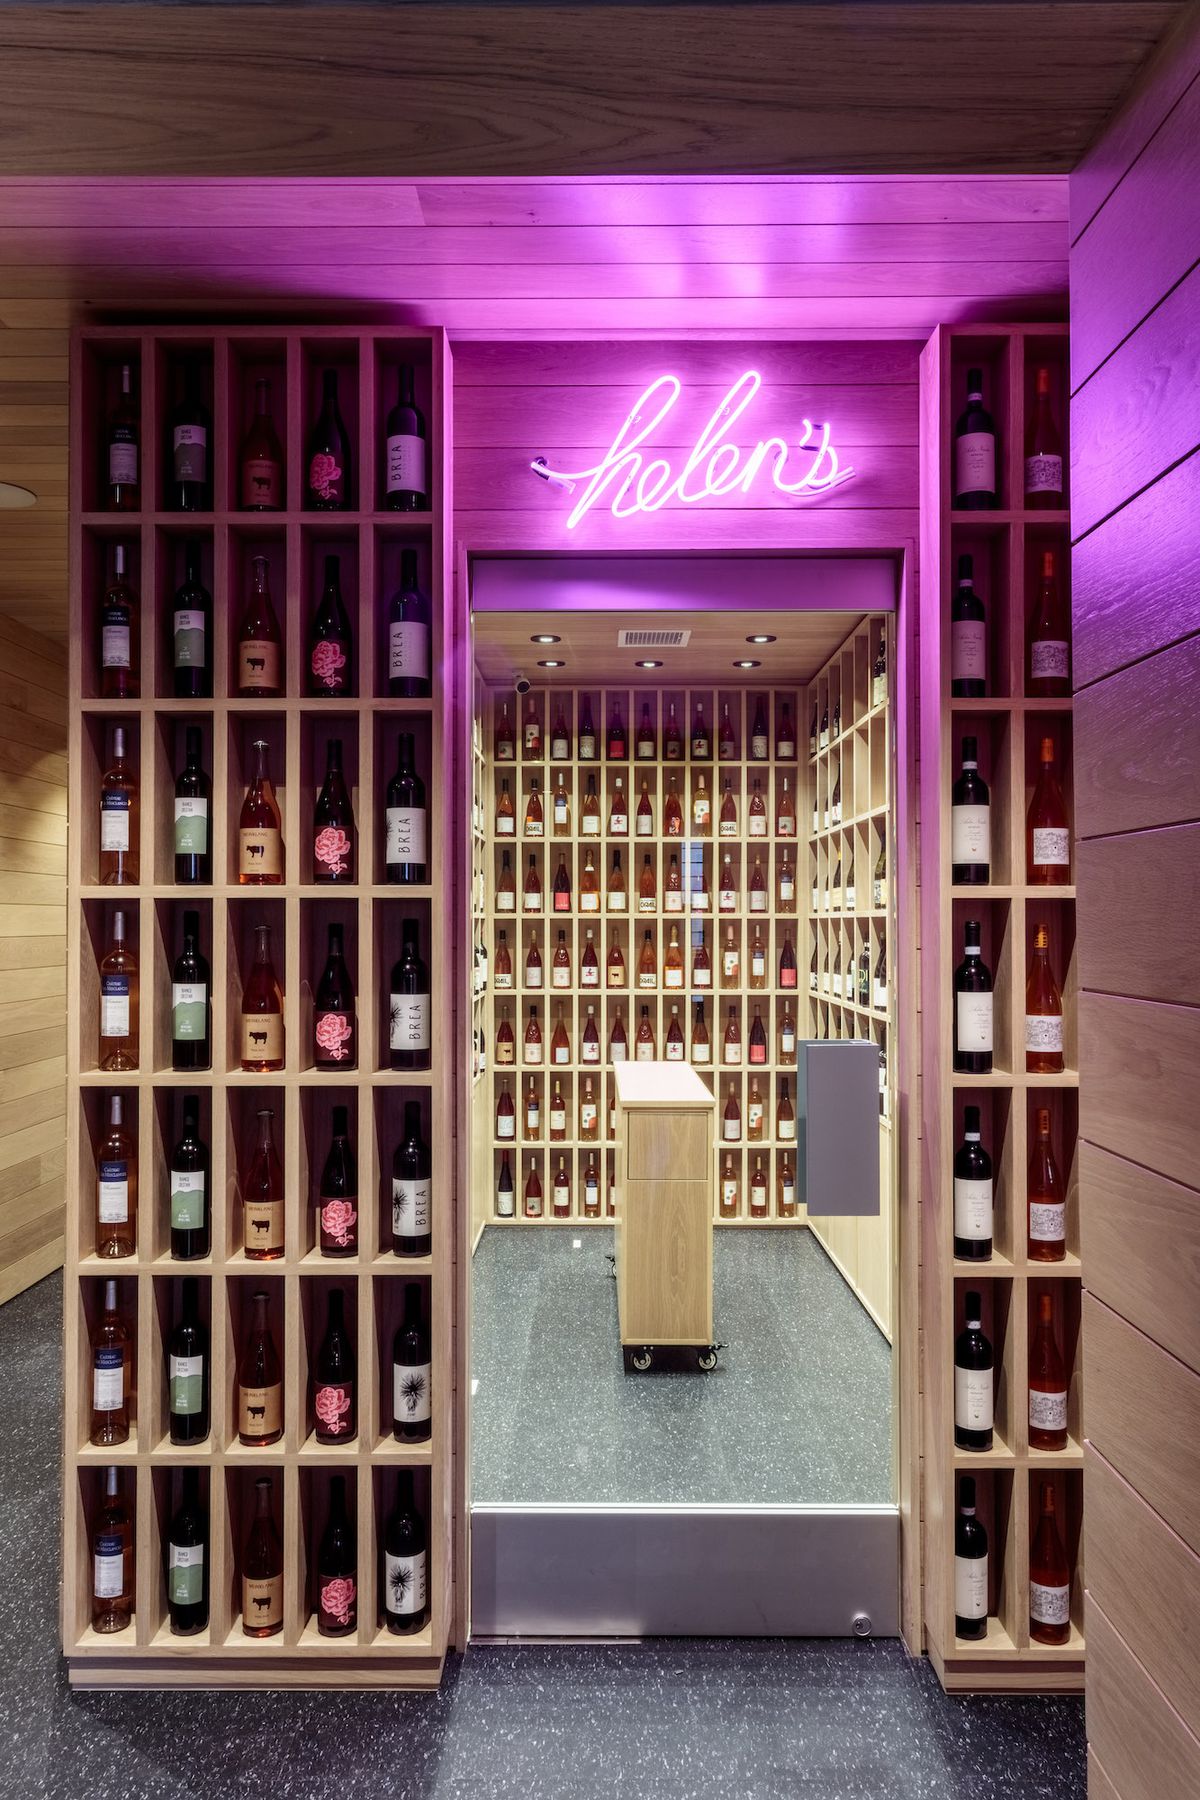 A vertical restaurant wine bar area with bottles shown in open wood nooks.